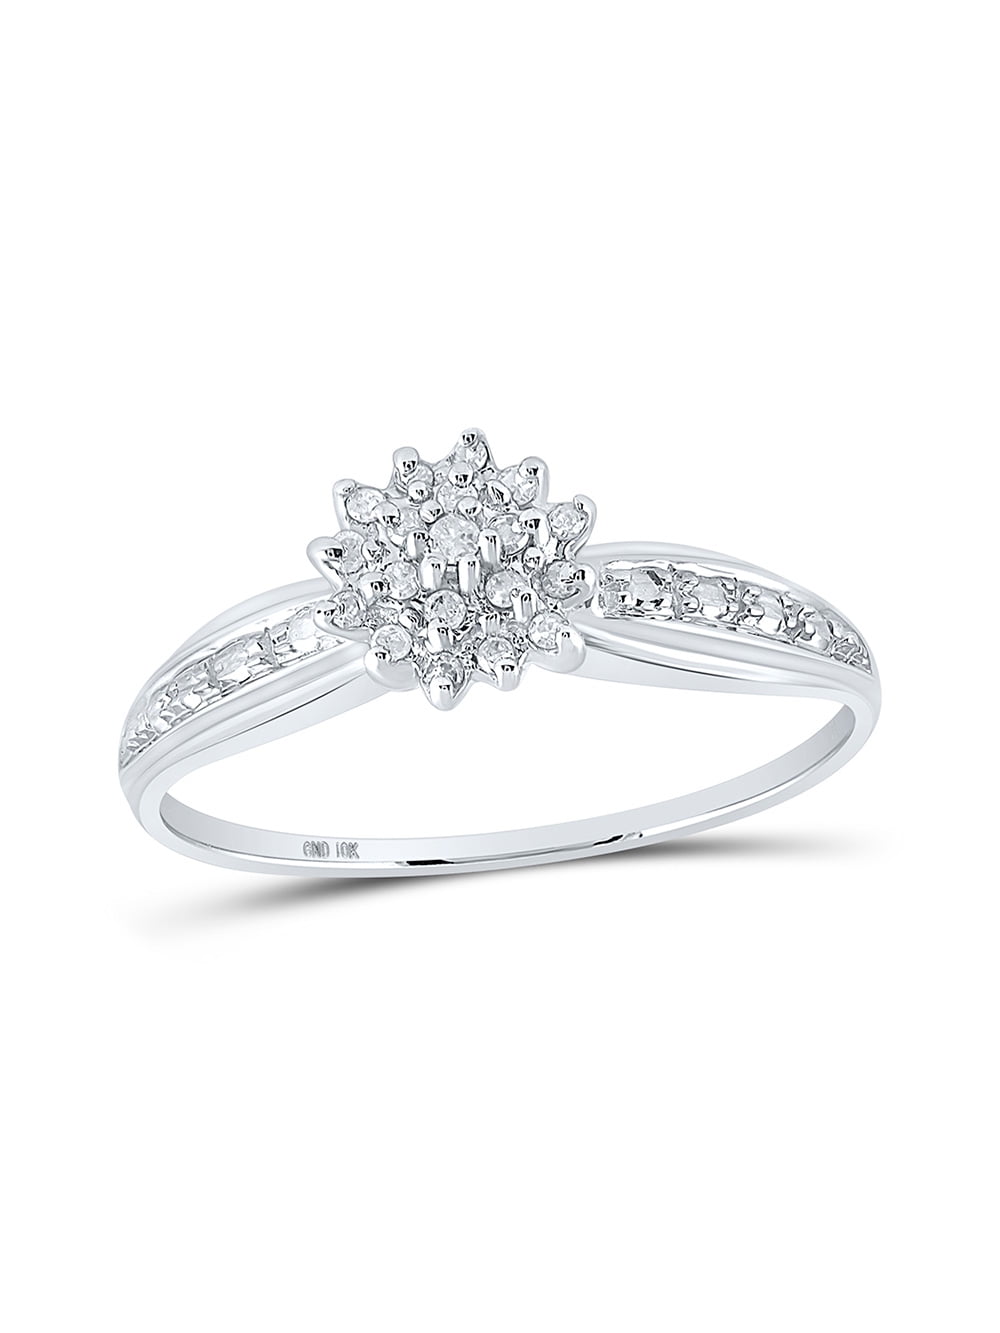 Ross-Simons 0.40 ct. t.w. Diamond Pear-Shaped Cluster Ring in 